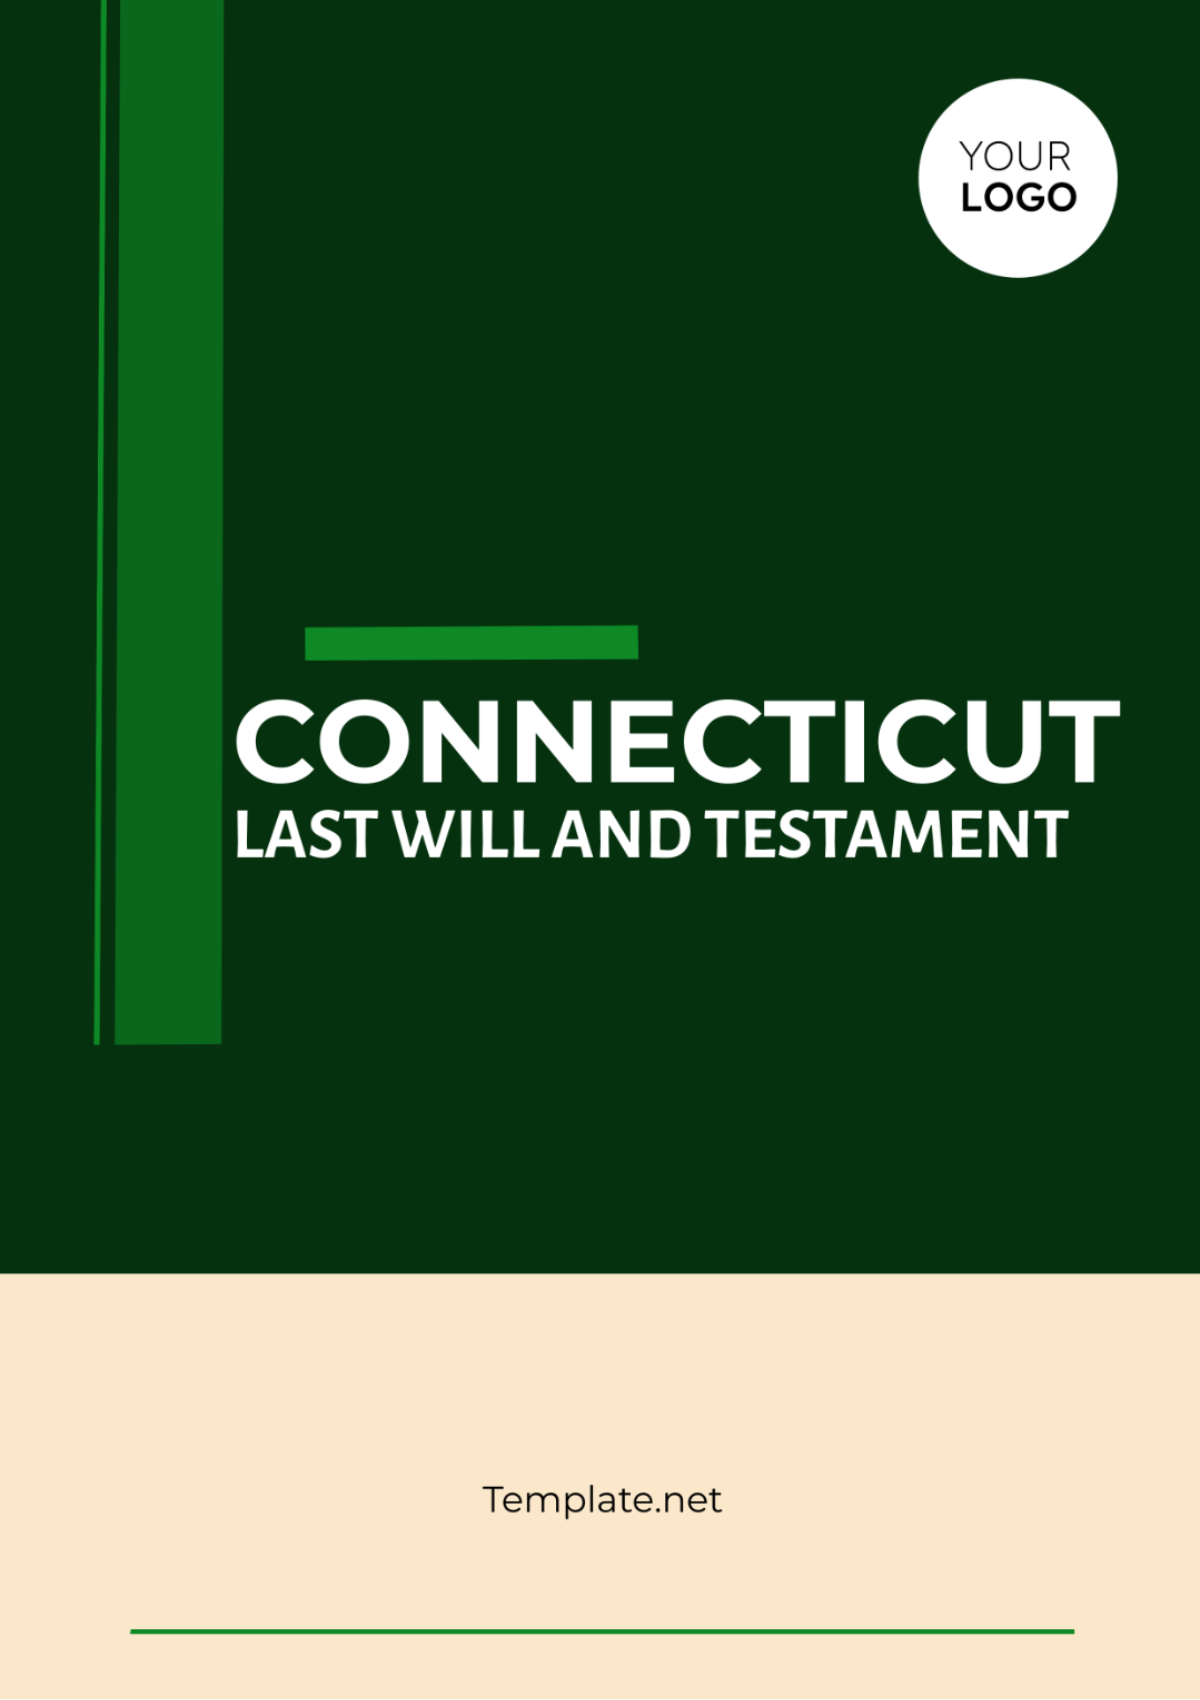 Connecticut Last Will and Testament Template